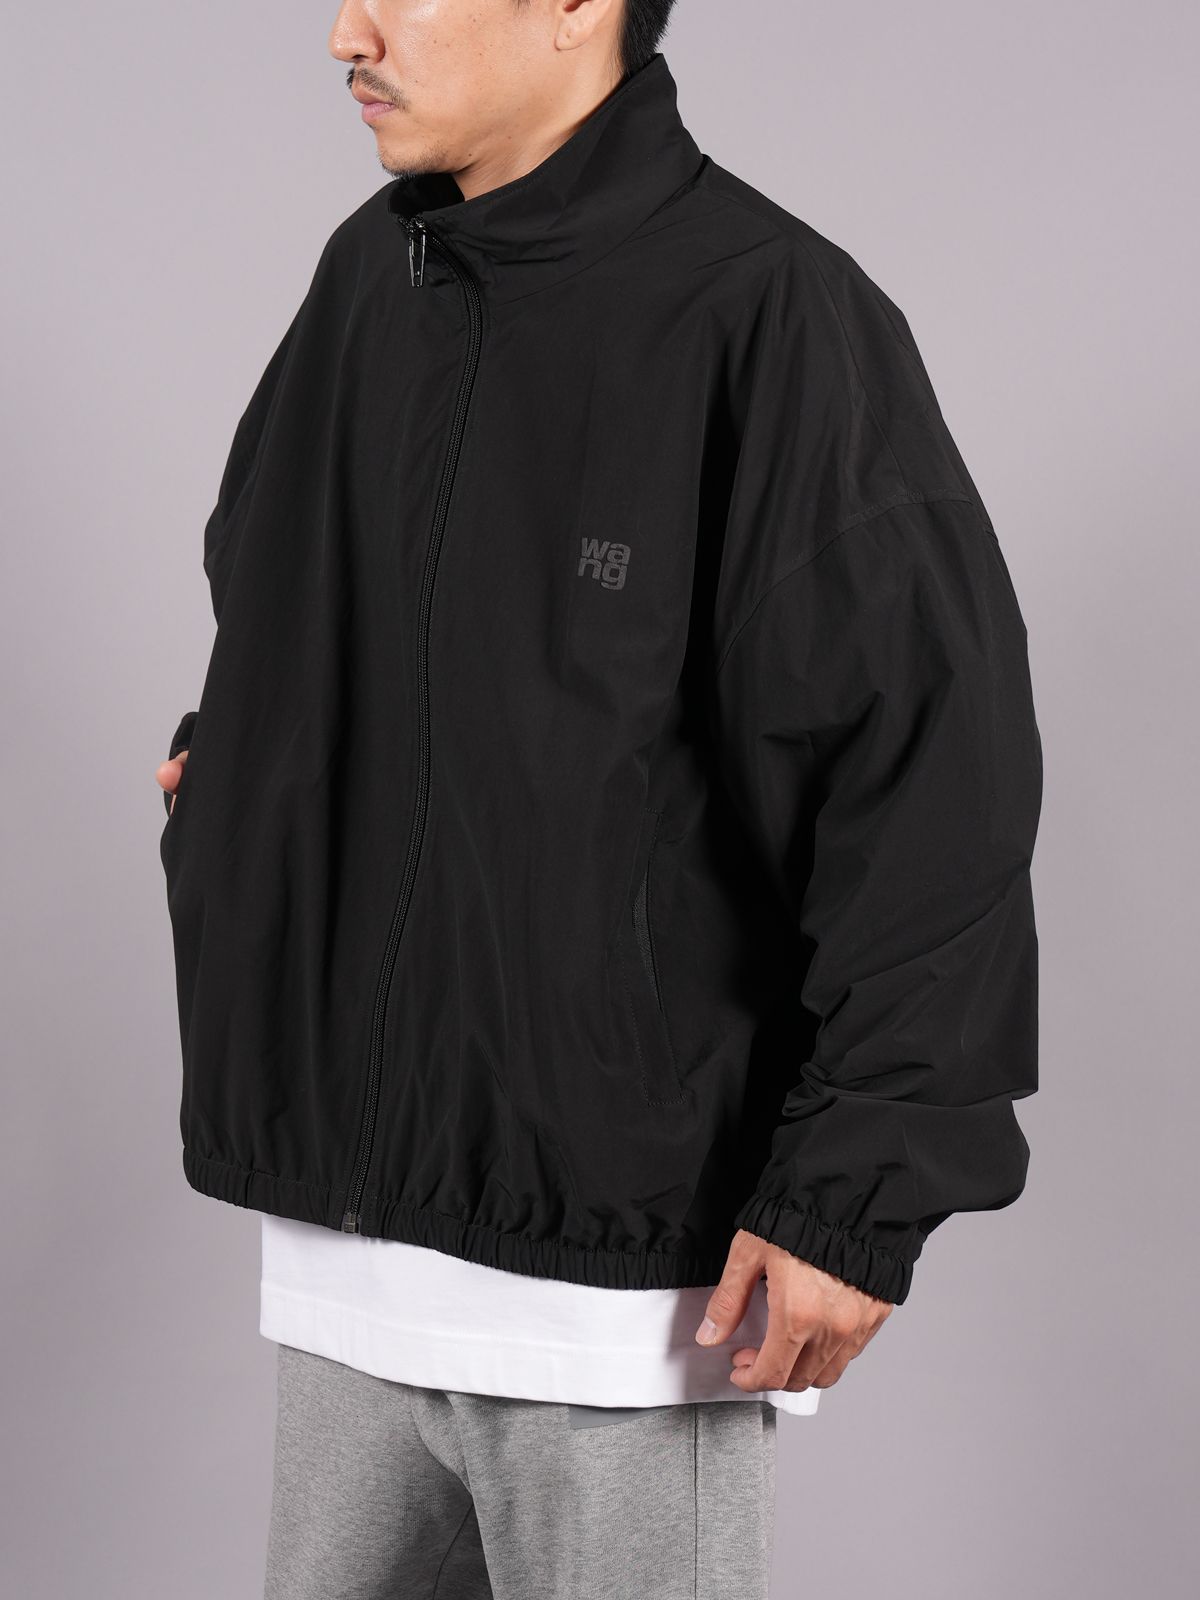 alexander wang - 【ラスト1点】COACHES TRACK JACKET WITH WANG PUFF 